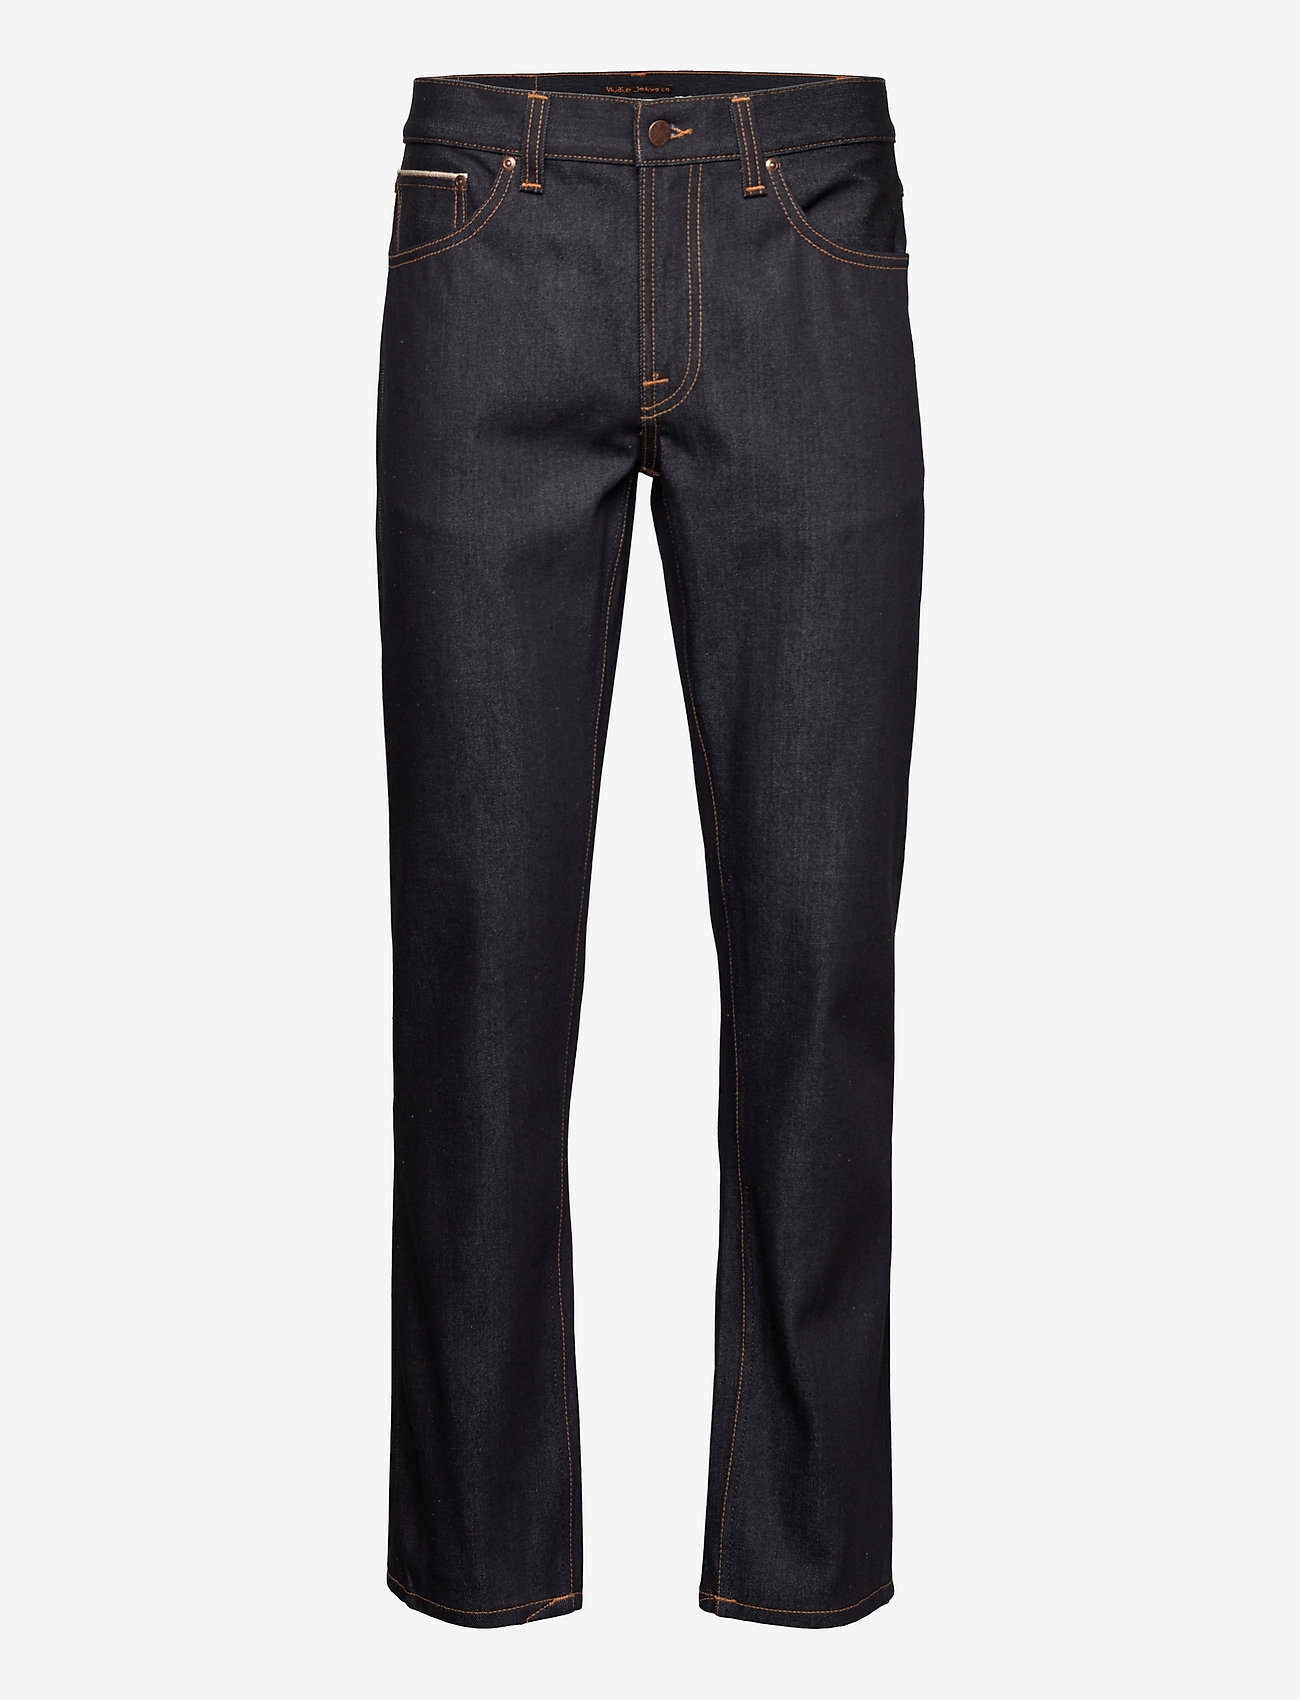 Nudie Jeans - Gritty Jackson - regular jeans - dry maze selvag - 1